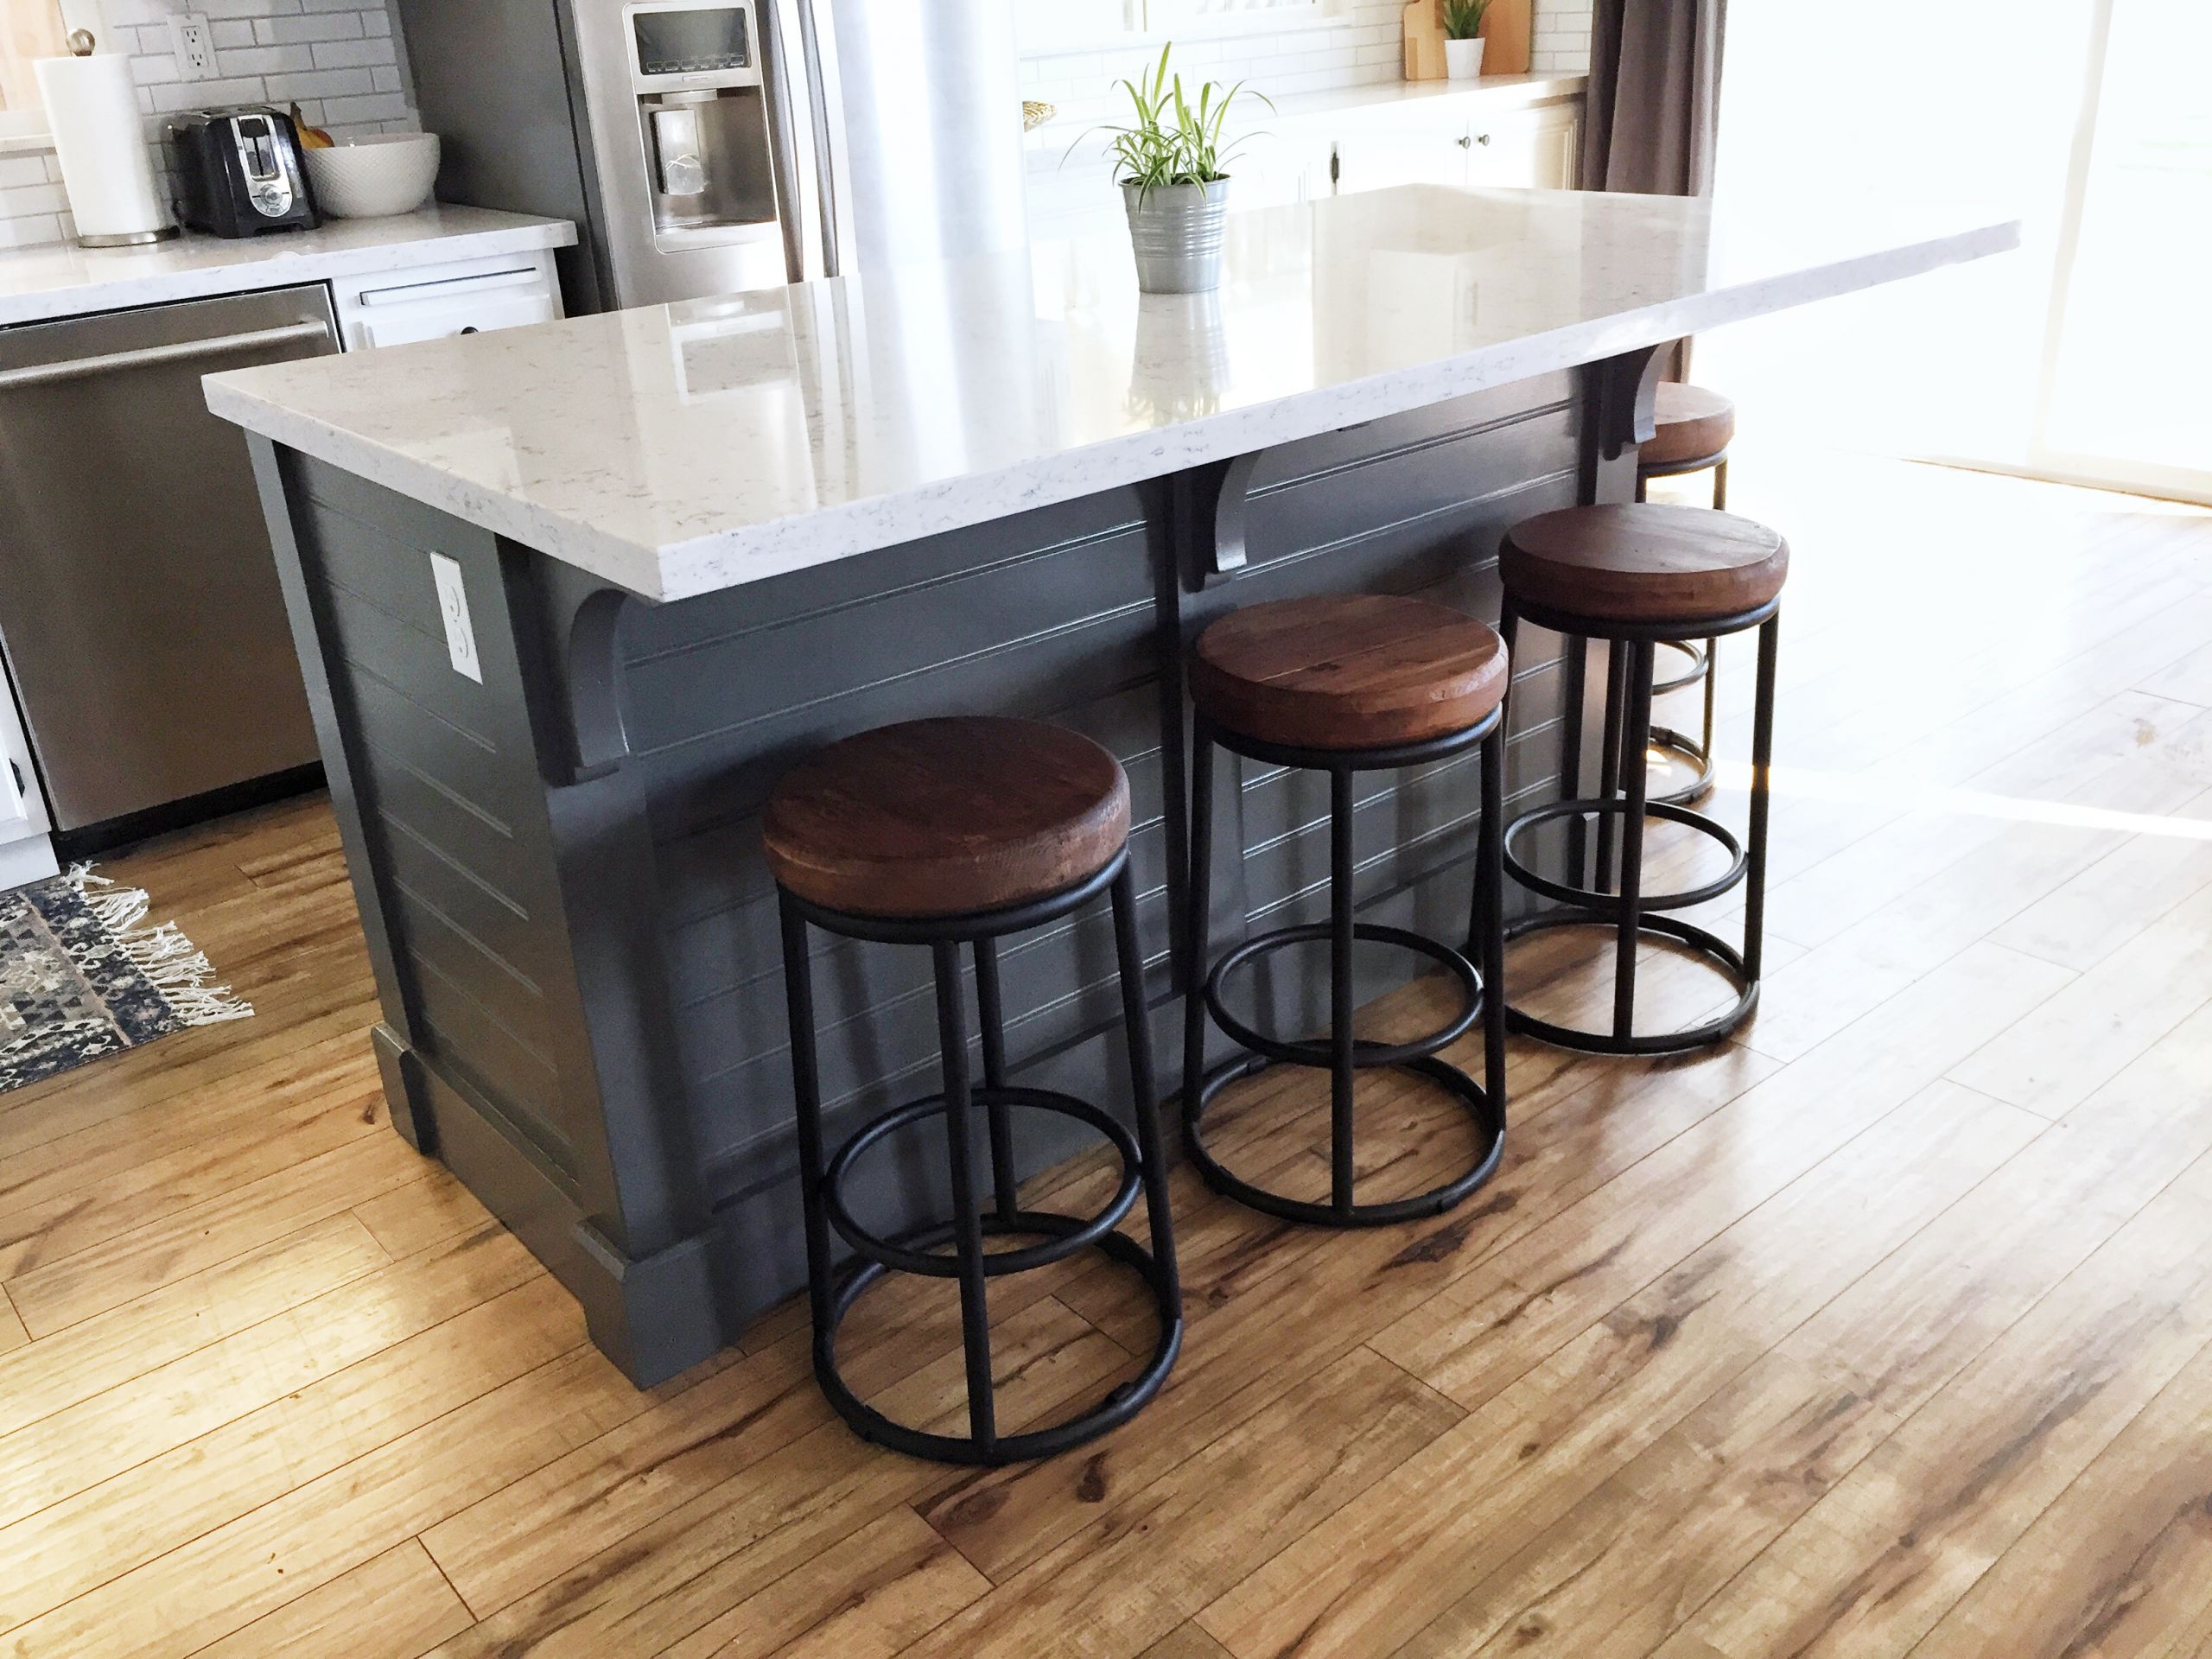 Small Kitchen Islands With Seating
 Kitchen Island Make it yourself Save Big $$$ Domestic